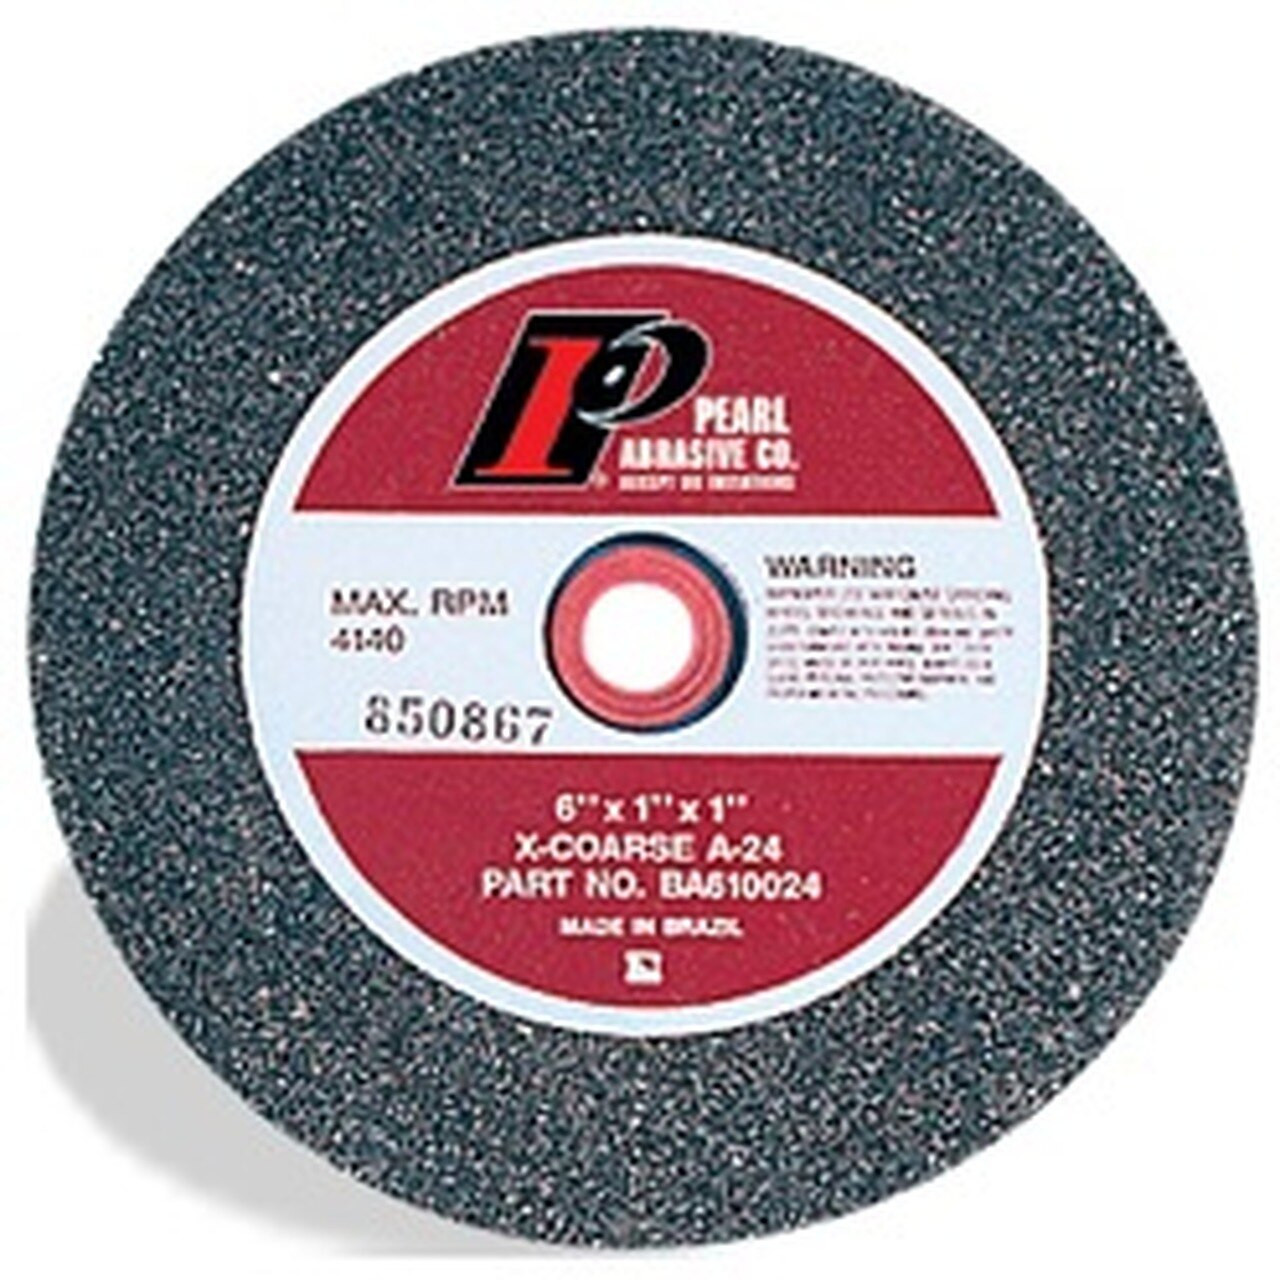 AO Bench Grinding Wheels for Metal, 6" x 3/4" x 1", Type 1 Shape A36